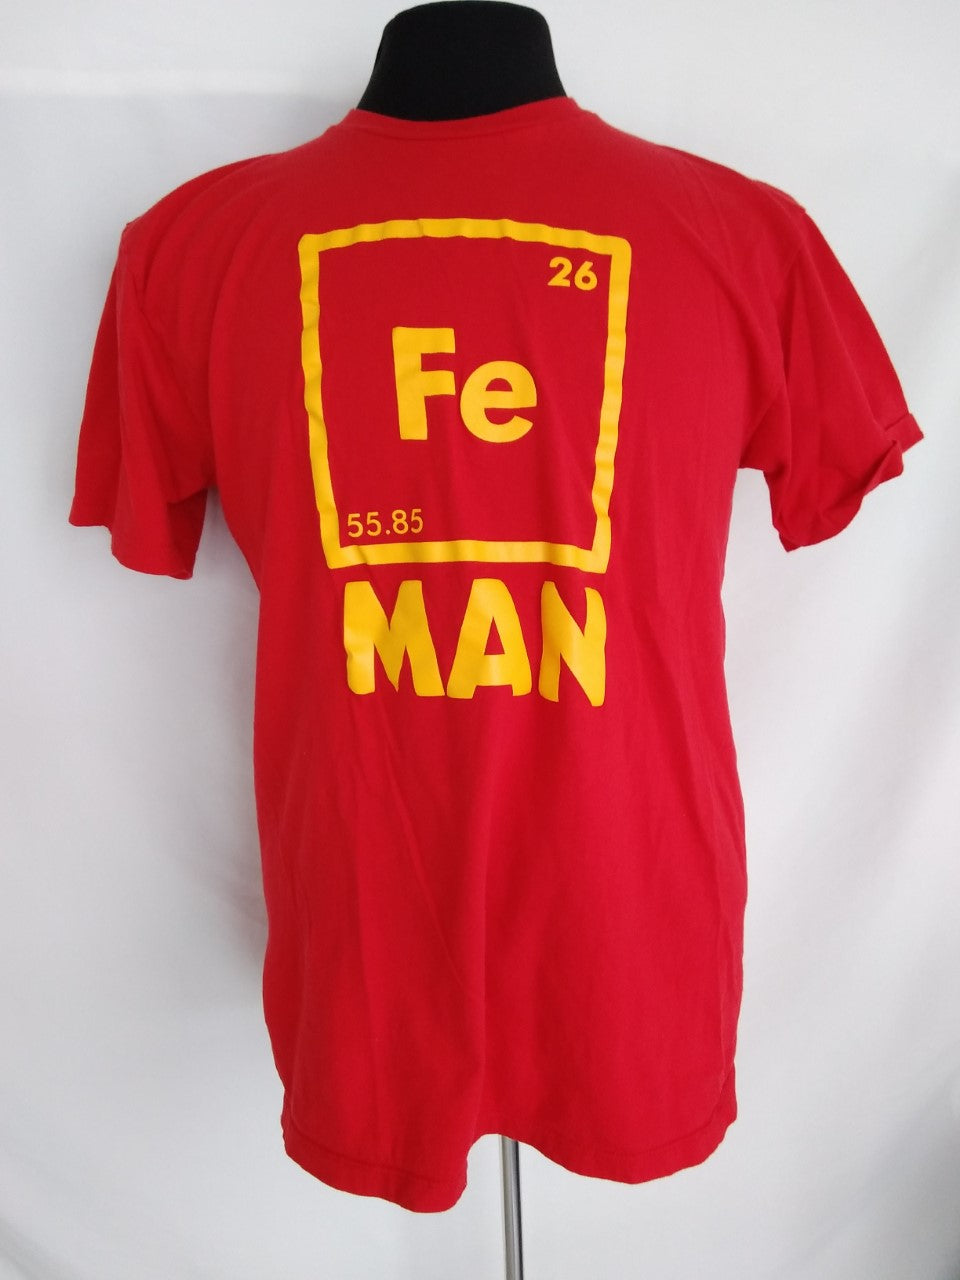 Graphic Tee Red Fe(Iron) Man - Size LG